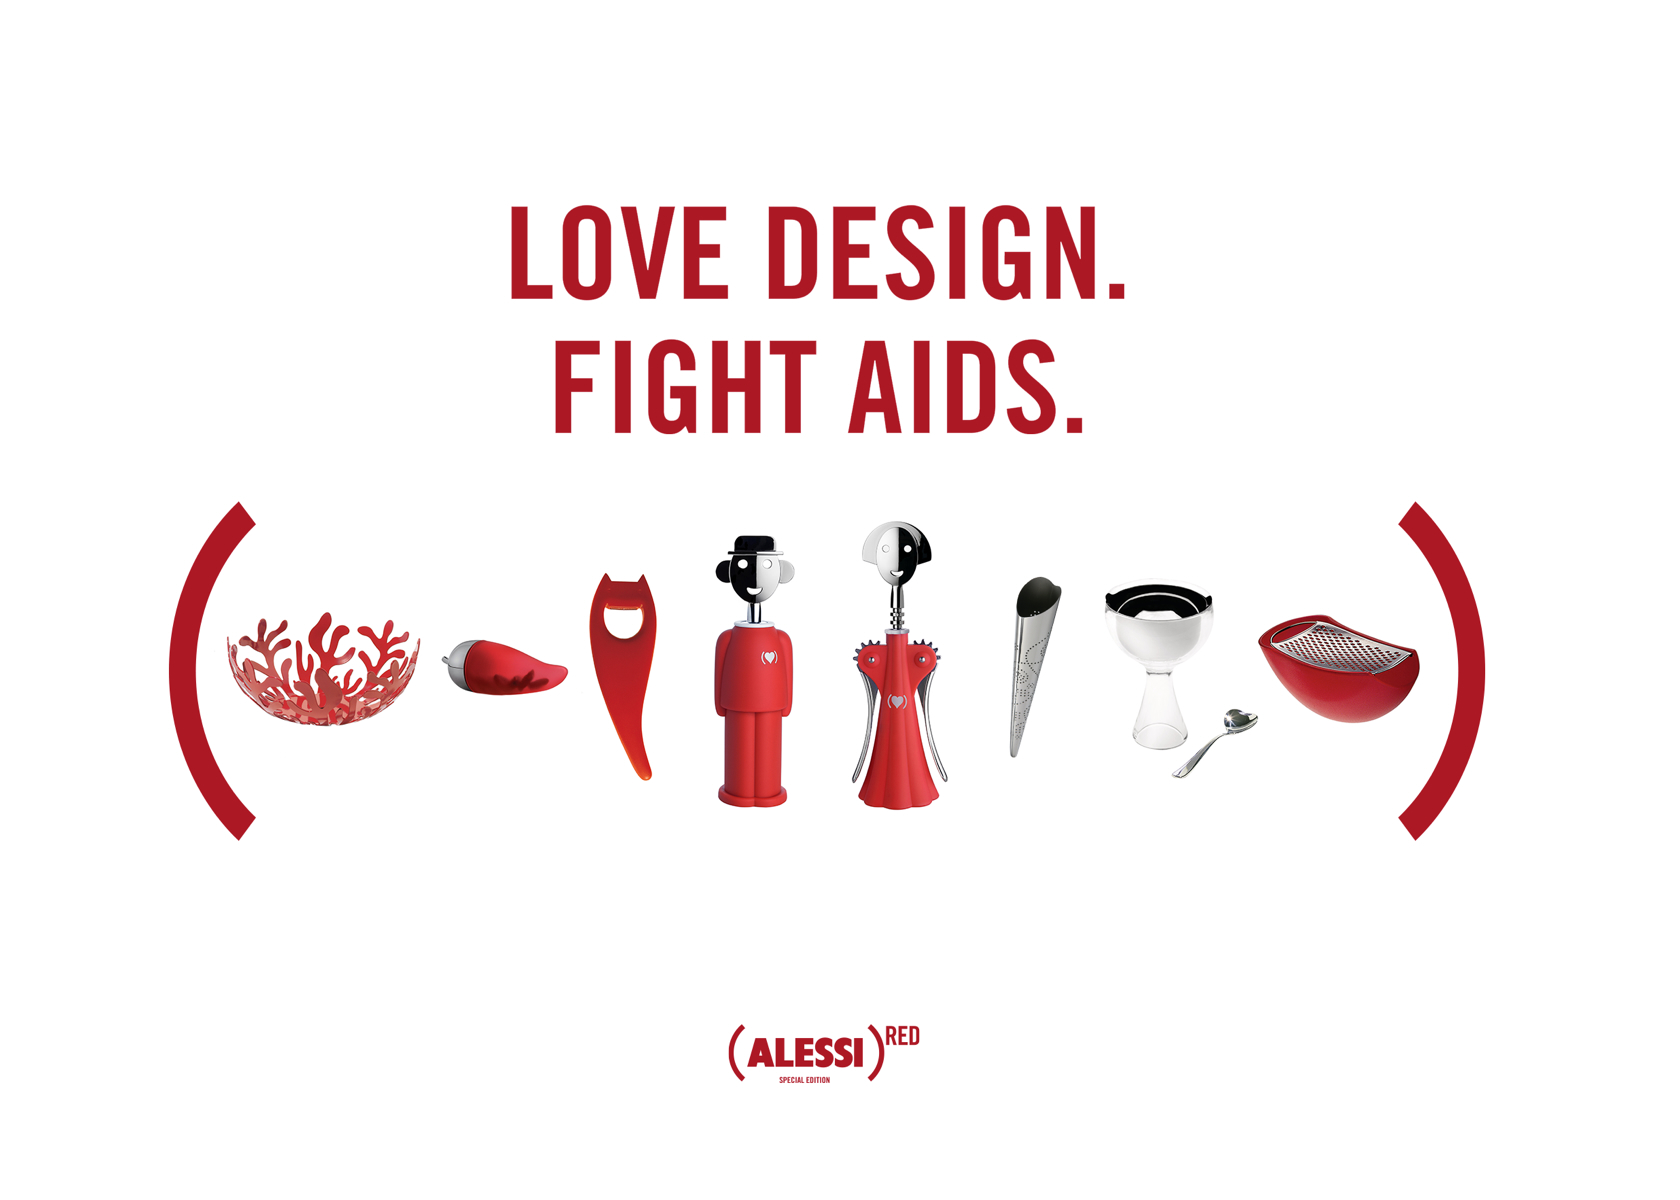 (ALESSI) RED